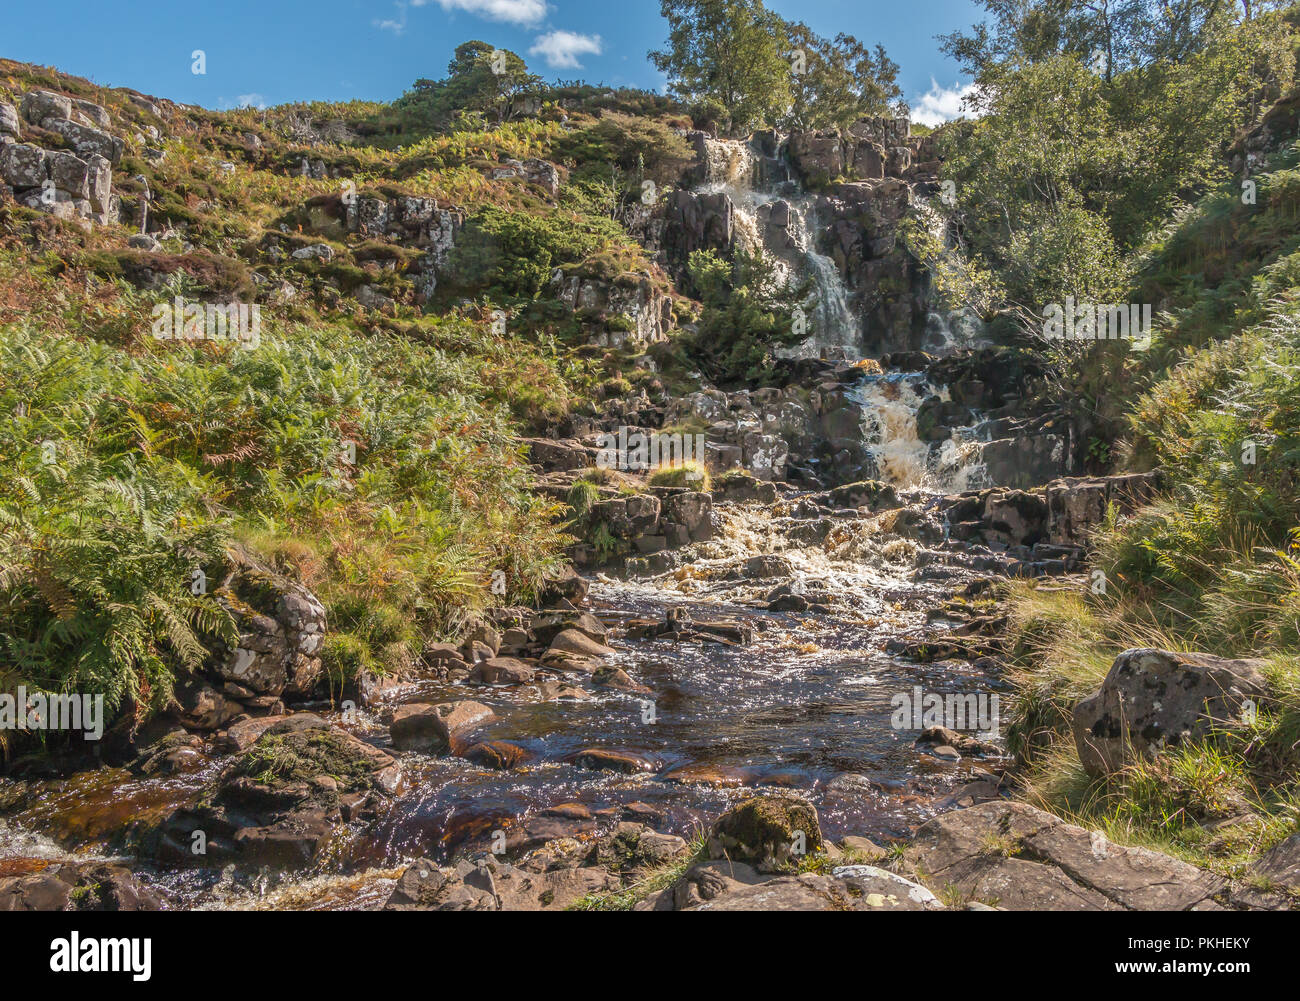 North Pennines AONB landscape, Blea Beck Force waterfall, Upper Teesdale, UK in strong early autumn sunshine Stock Photo